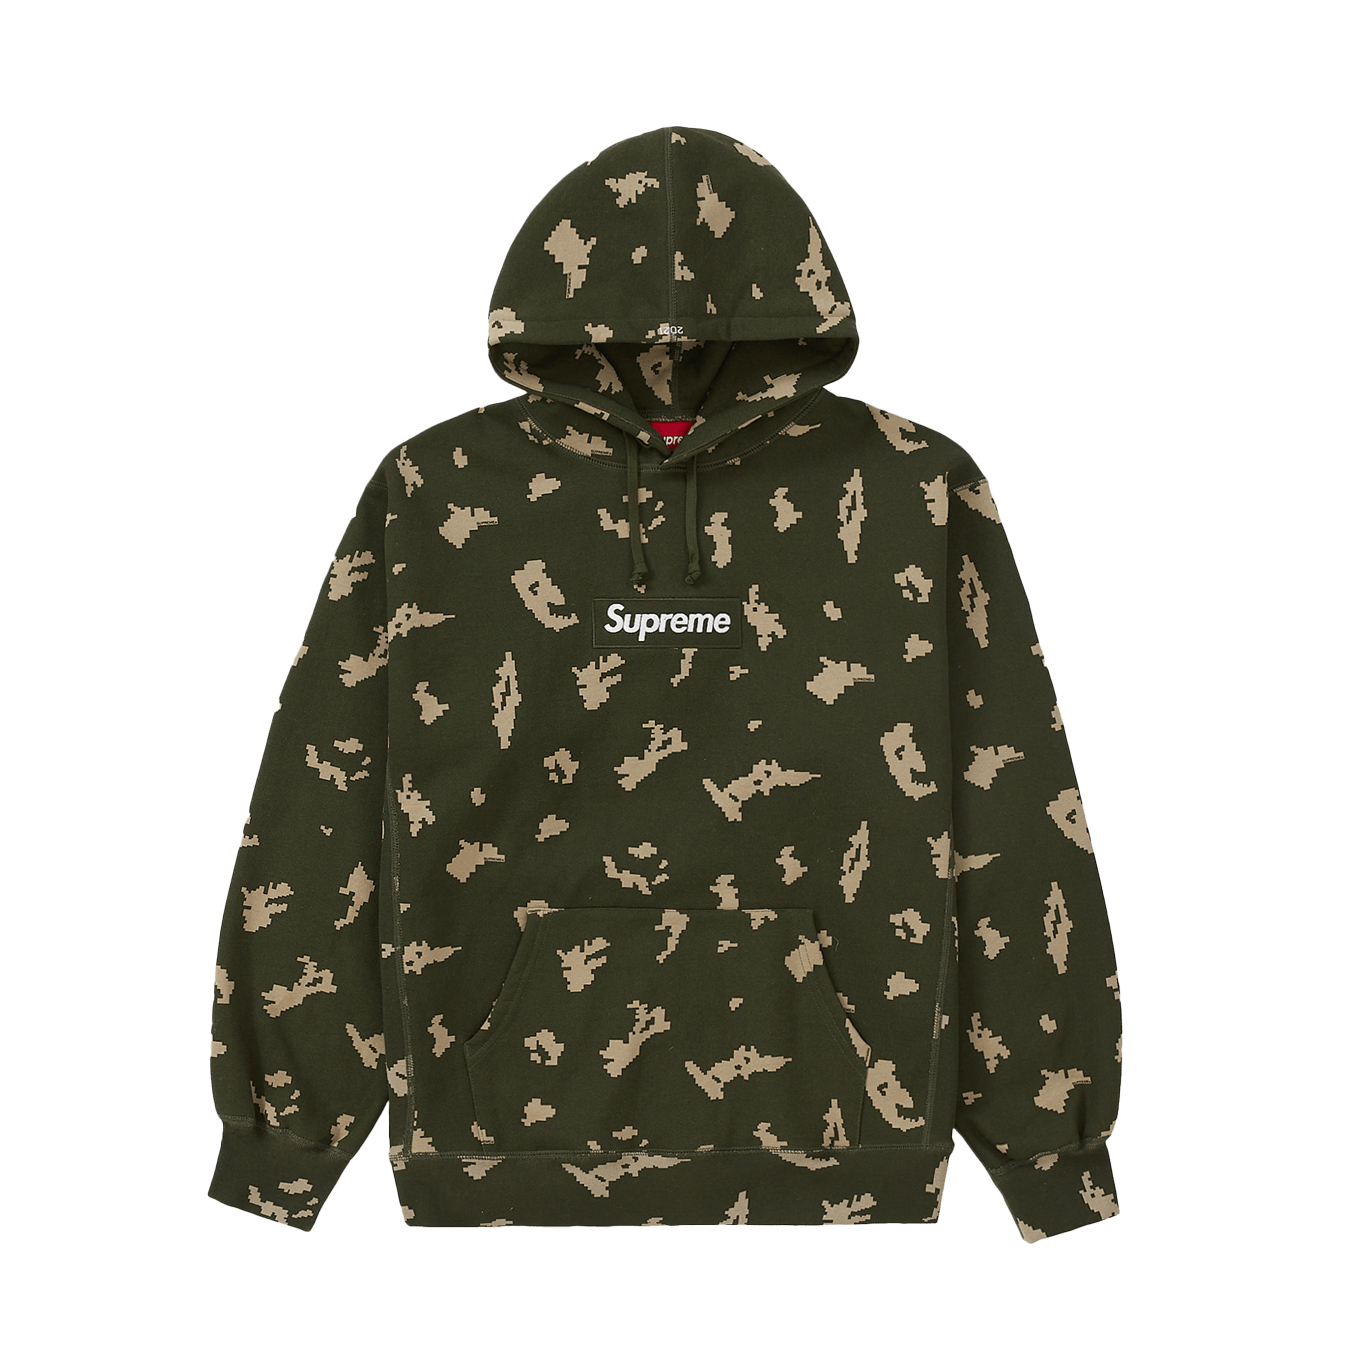 Here's my take on the Supreme x LV box hoodie for my fellow and